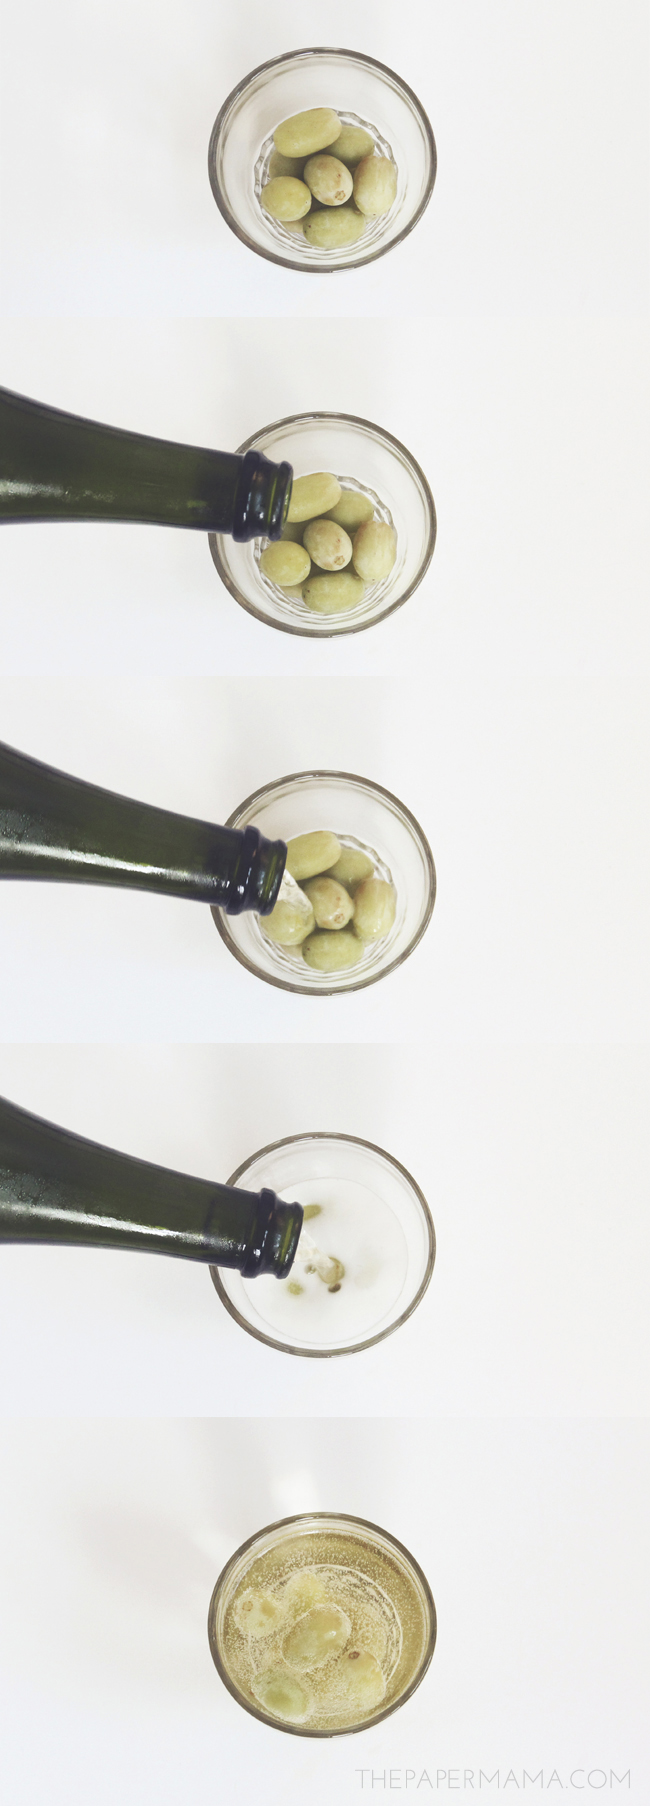 Frozen Grapes for Drinks // thepapermama.com